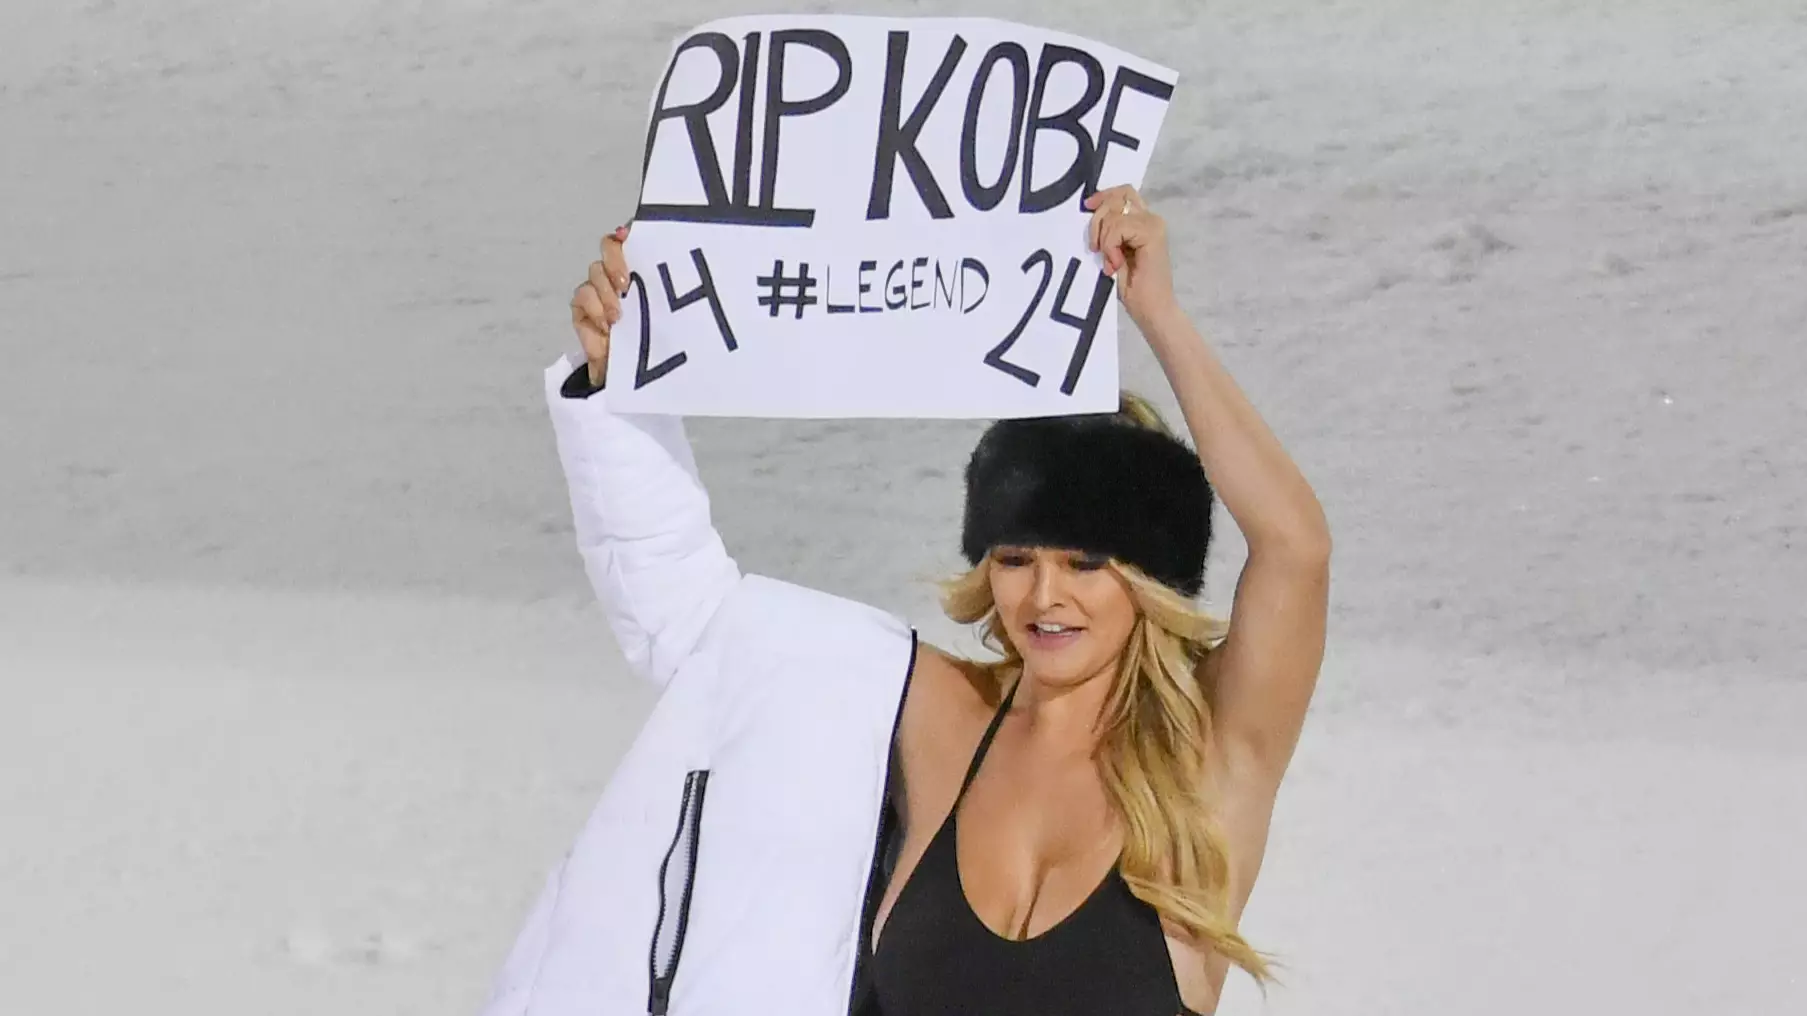 Champions League Final Streaker Strikes Again At Ski World Cup With Kobe Bryant Tribute